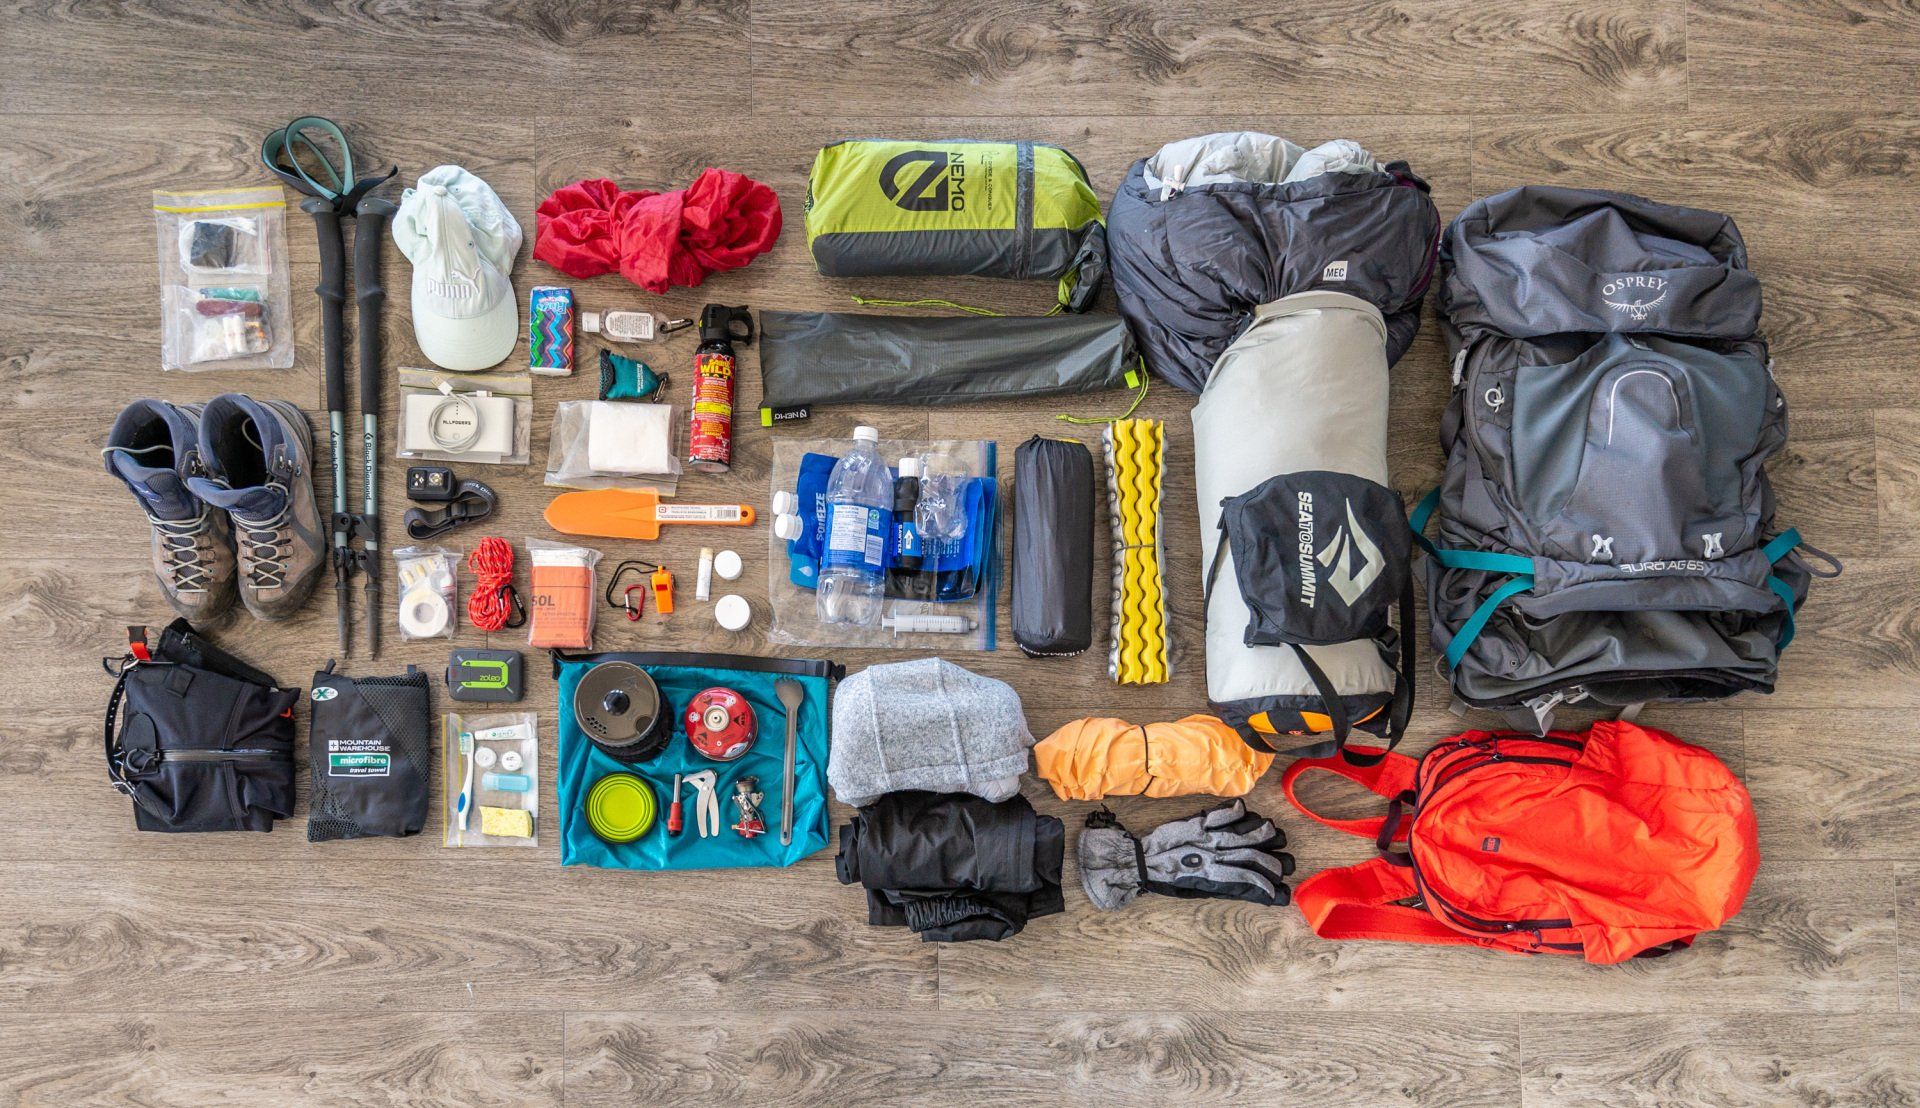 The contents of my backpacking backpack including all the gear I use for backcountry camping